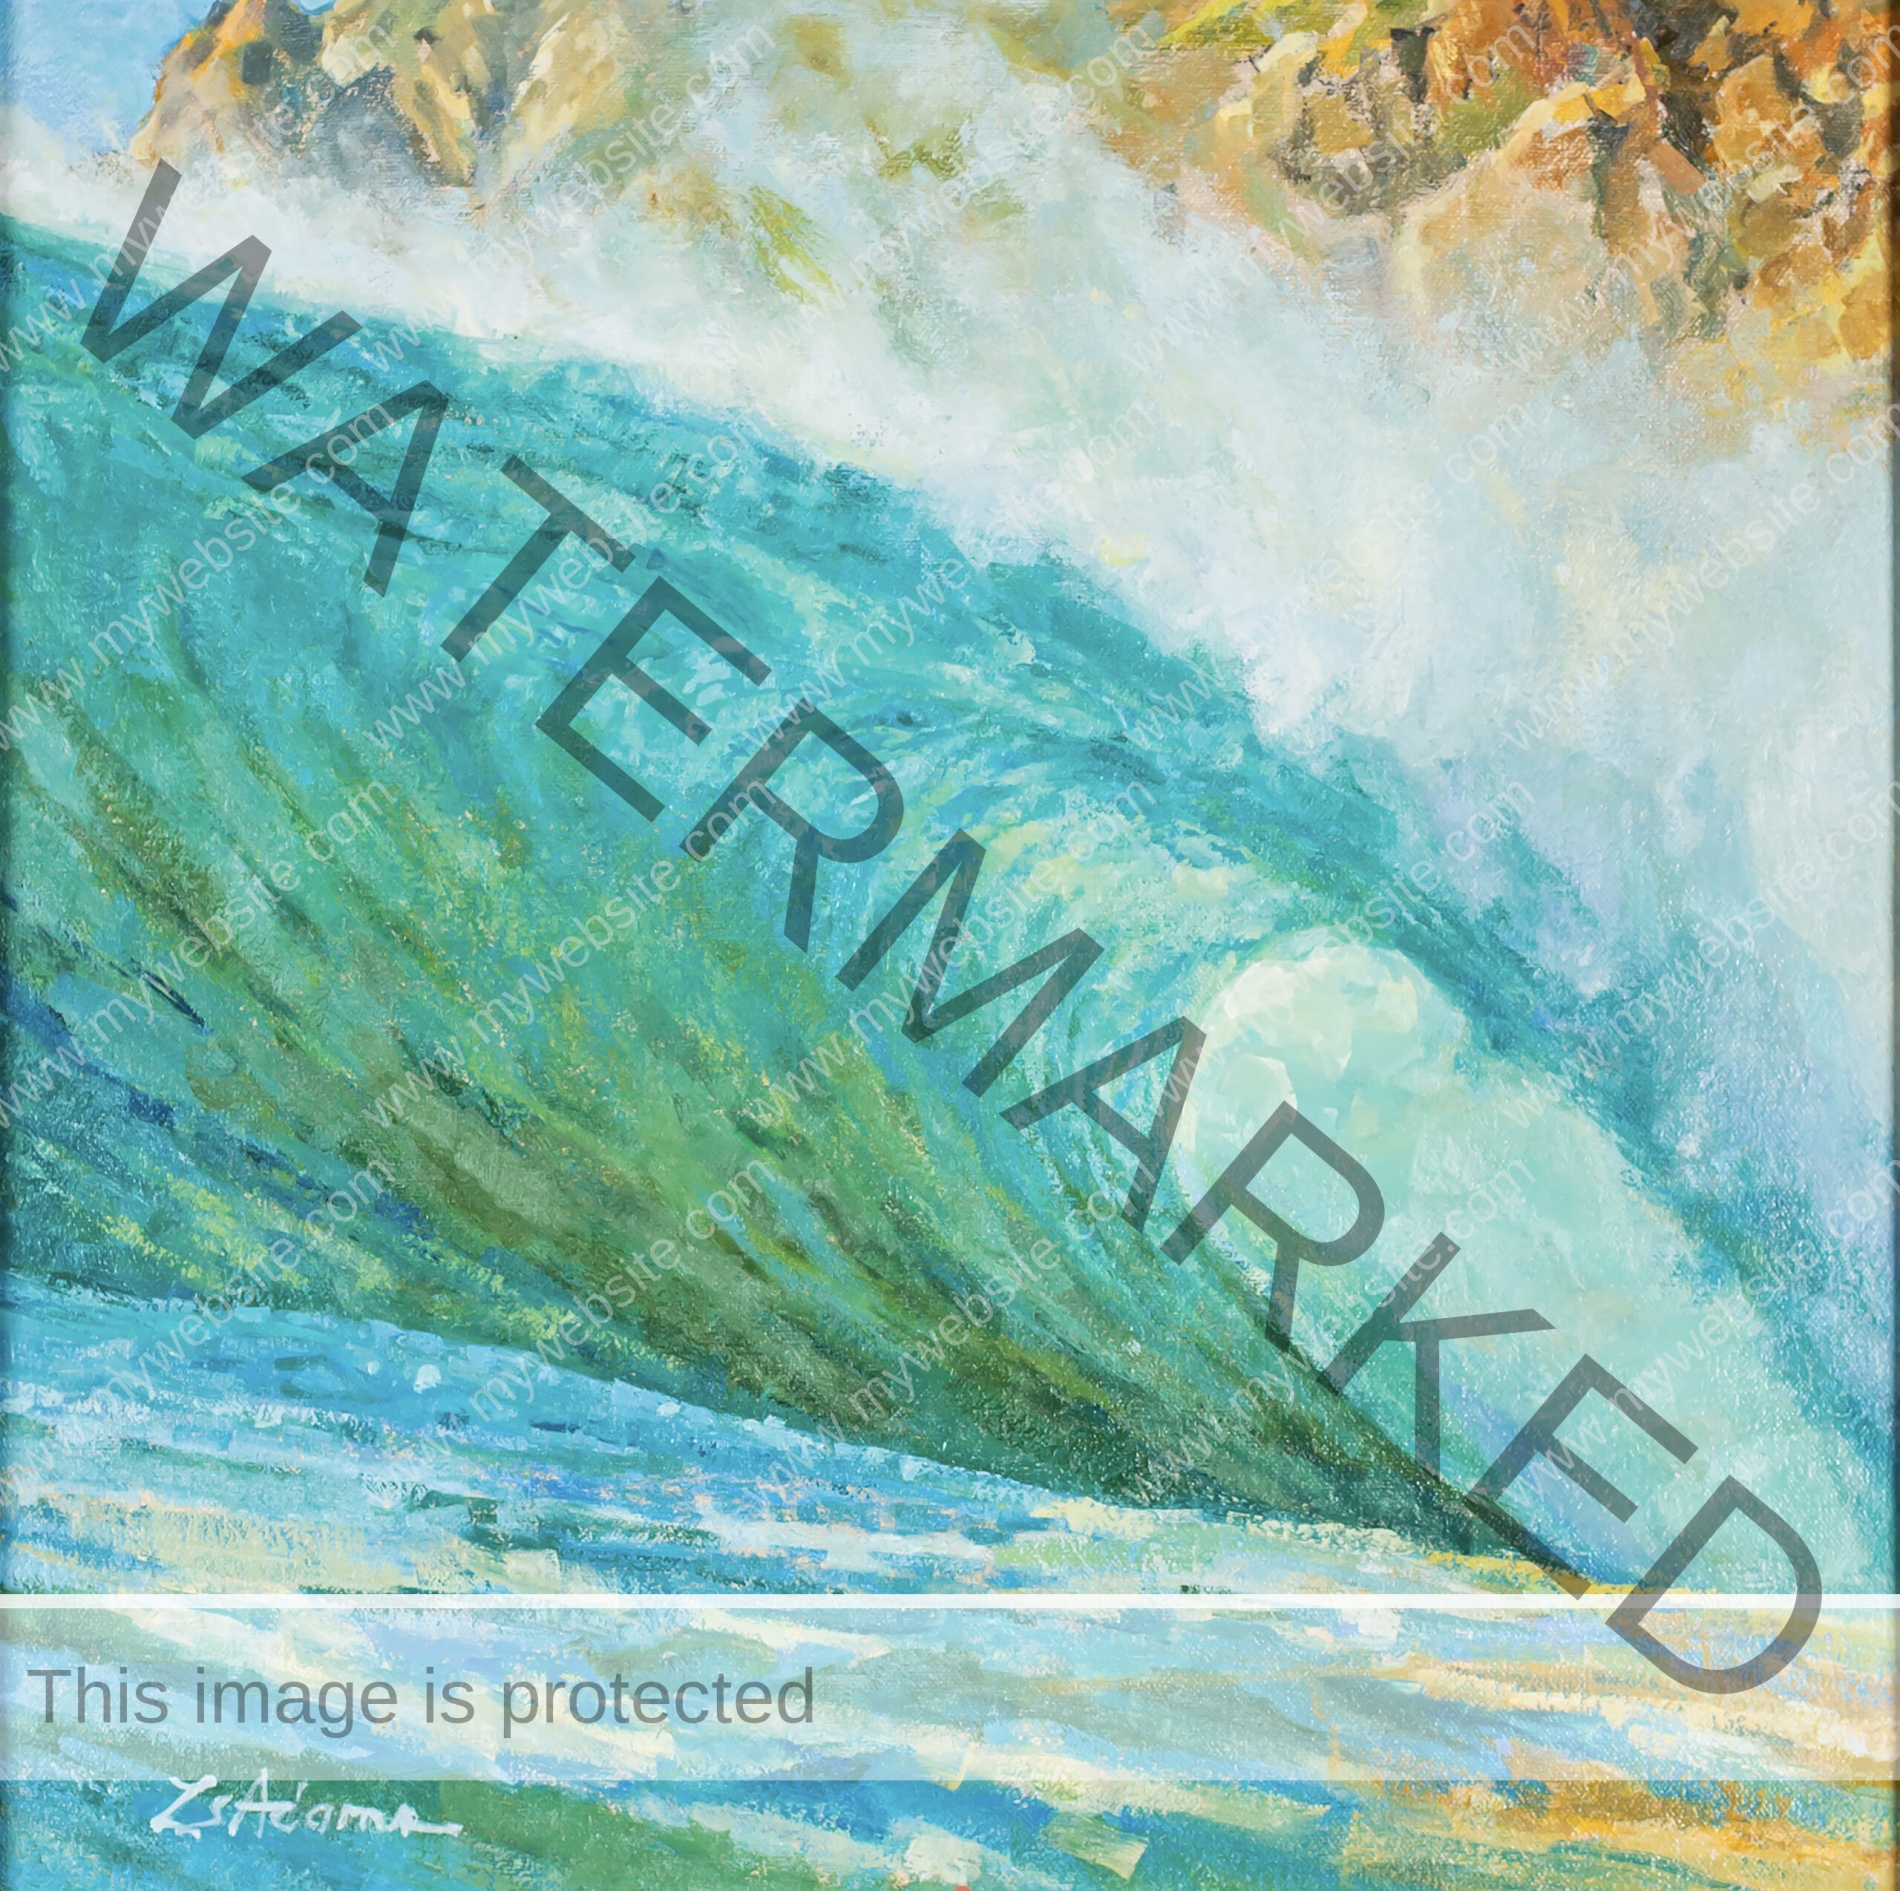 wave crashing oil painting by Susan Adams, featuring the energy and movement of a wave mid-crashing. The vibrant turquoise and green tones create a sense of depth and power.